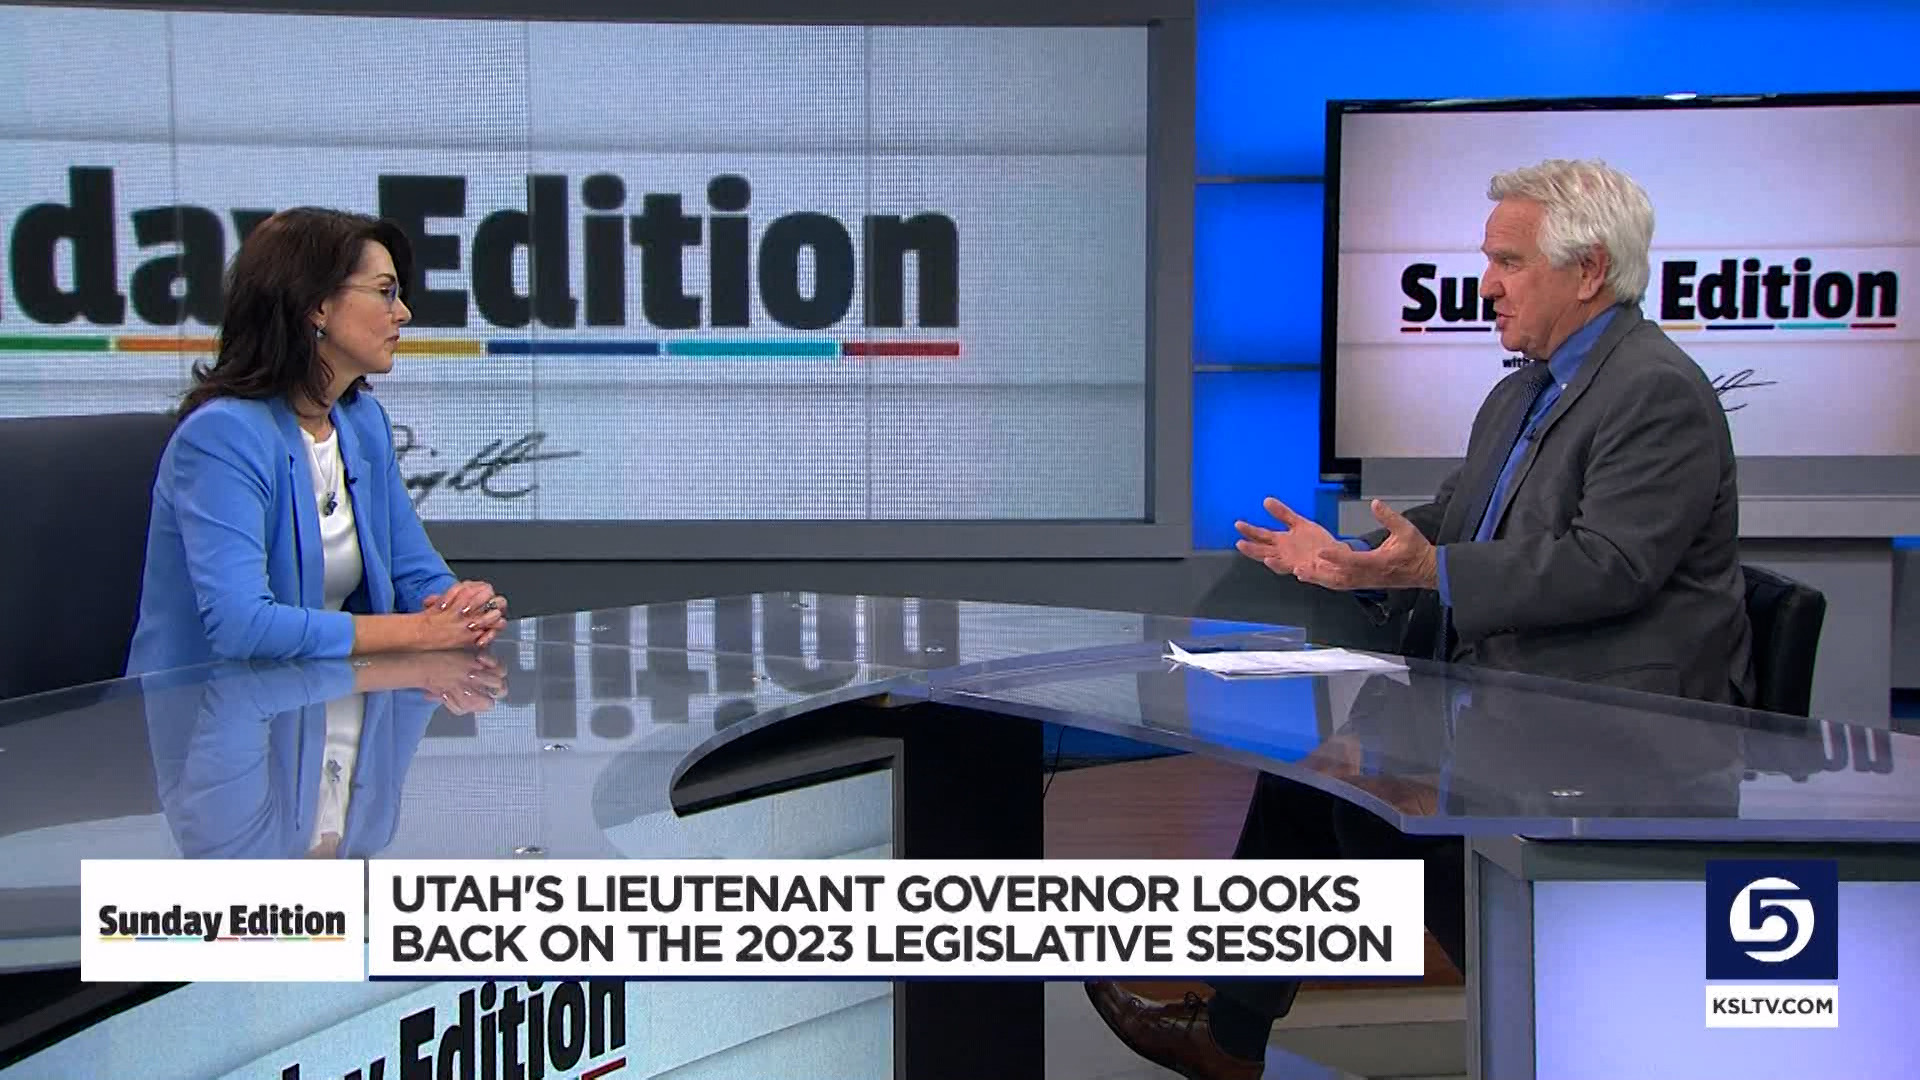 This week on Sunday Edition, Doug Wright sits down with Utah's Lieutenant Governor, Deidre Henderso...